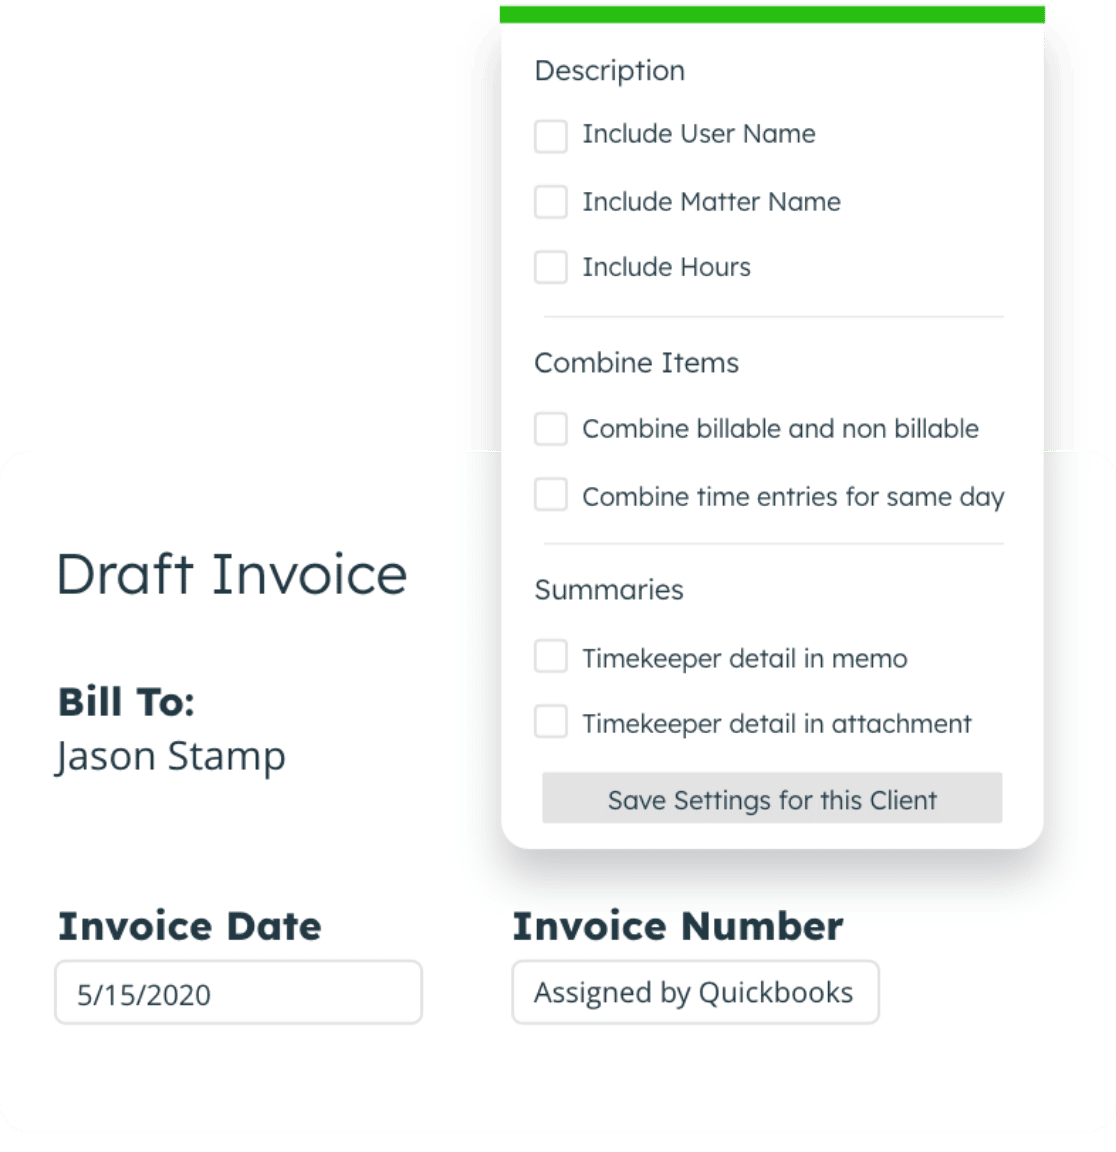 LeanLaw Draft invoice information and setting options